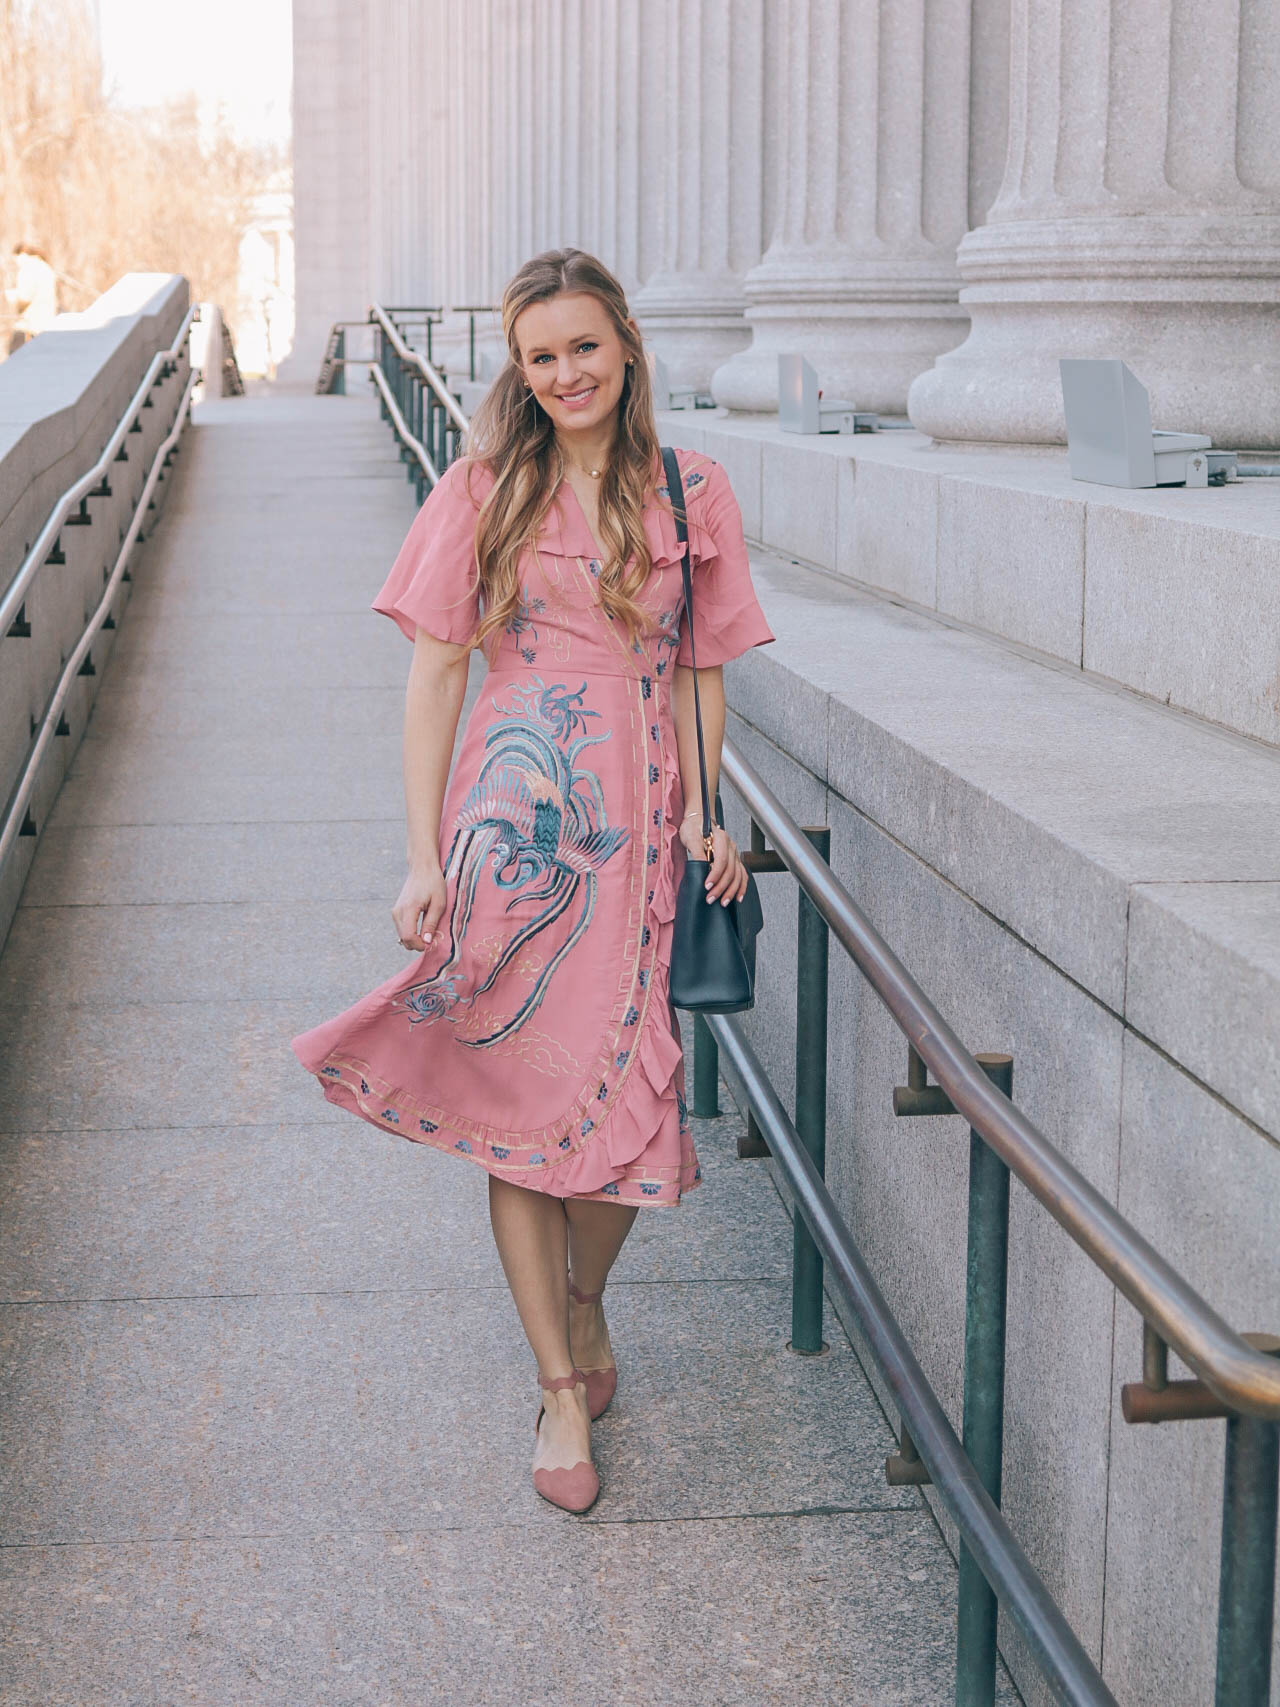 Leigha Gardner on choosing spring outfits based on less than ideal weather, personal style, and reasonable price points